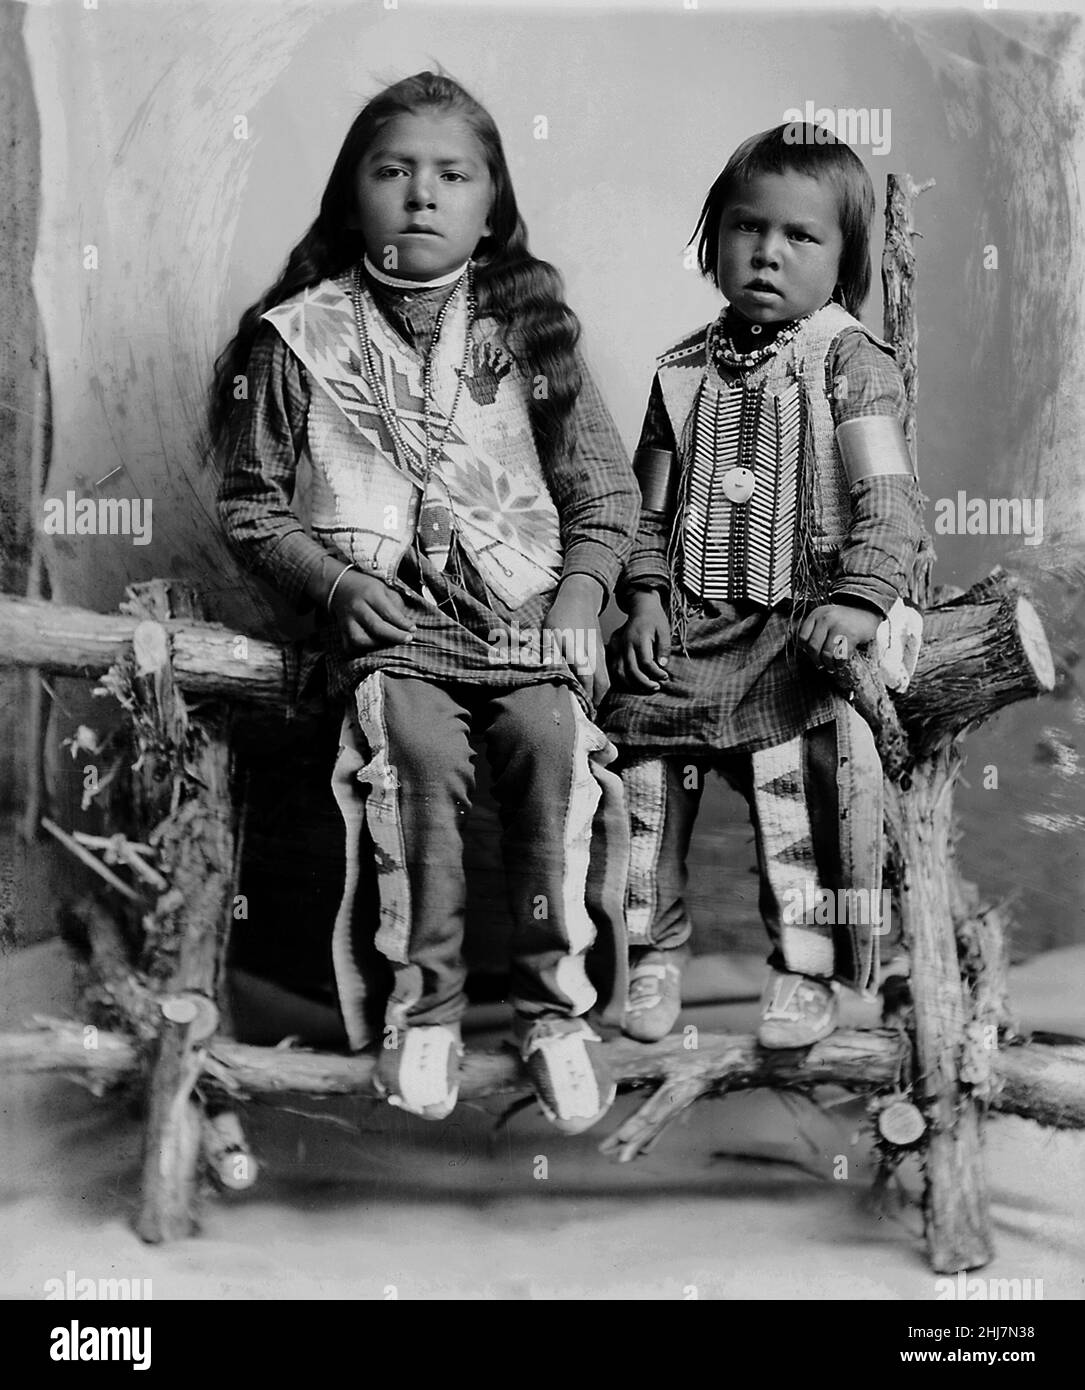 Antique and vintage photo - Indian / American Indian / Native American from Southeastern Idaho c 1897. Children. Vintage black and white photo. Stock Photo